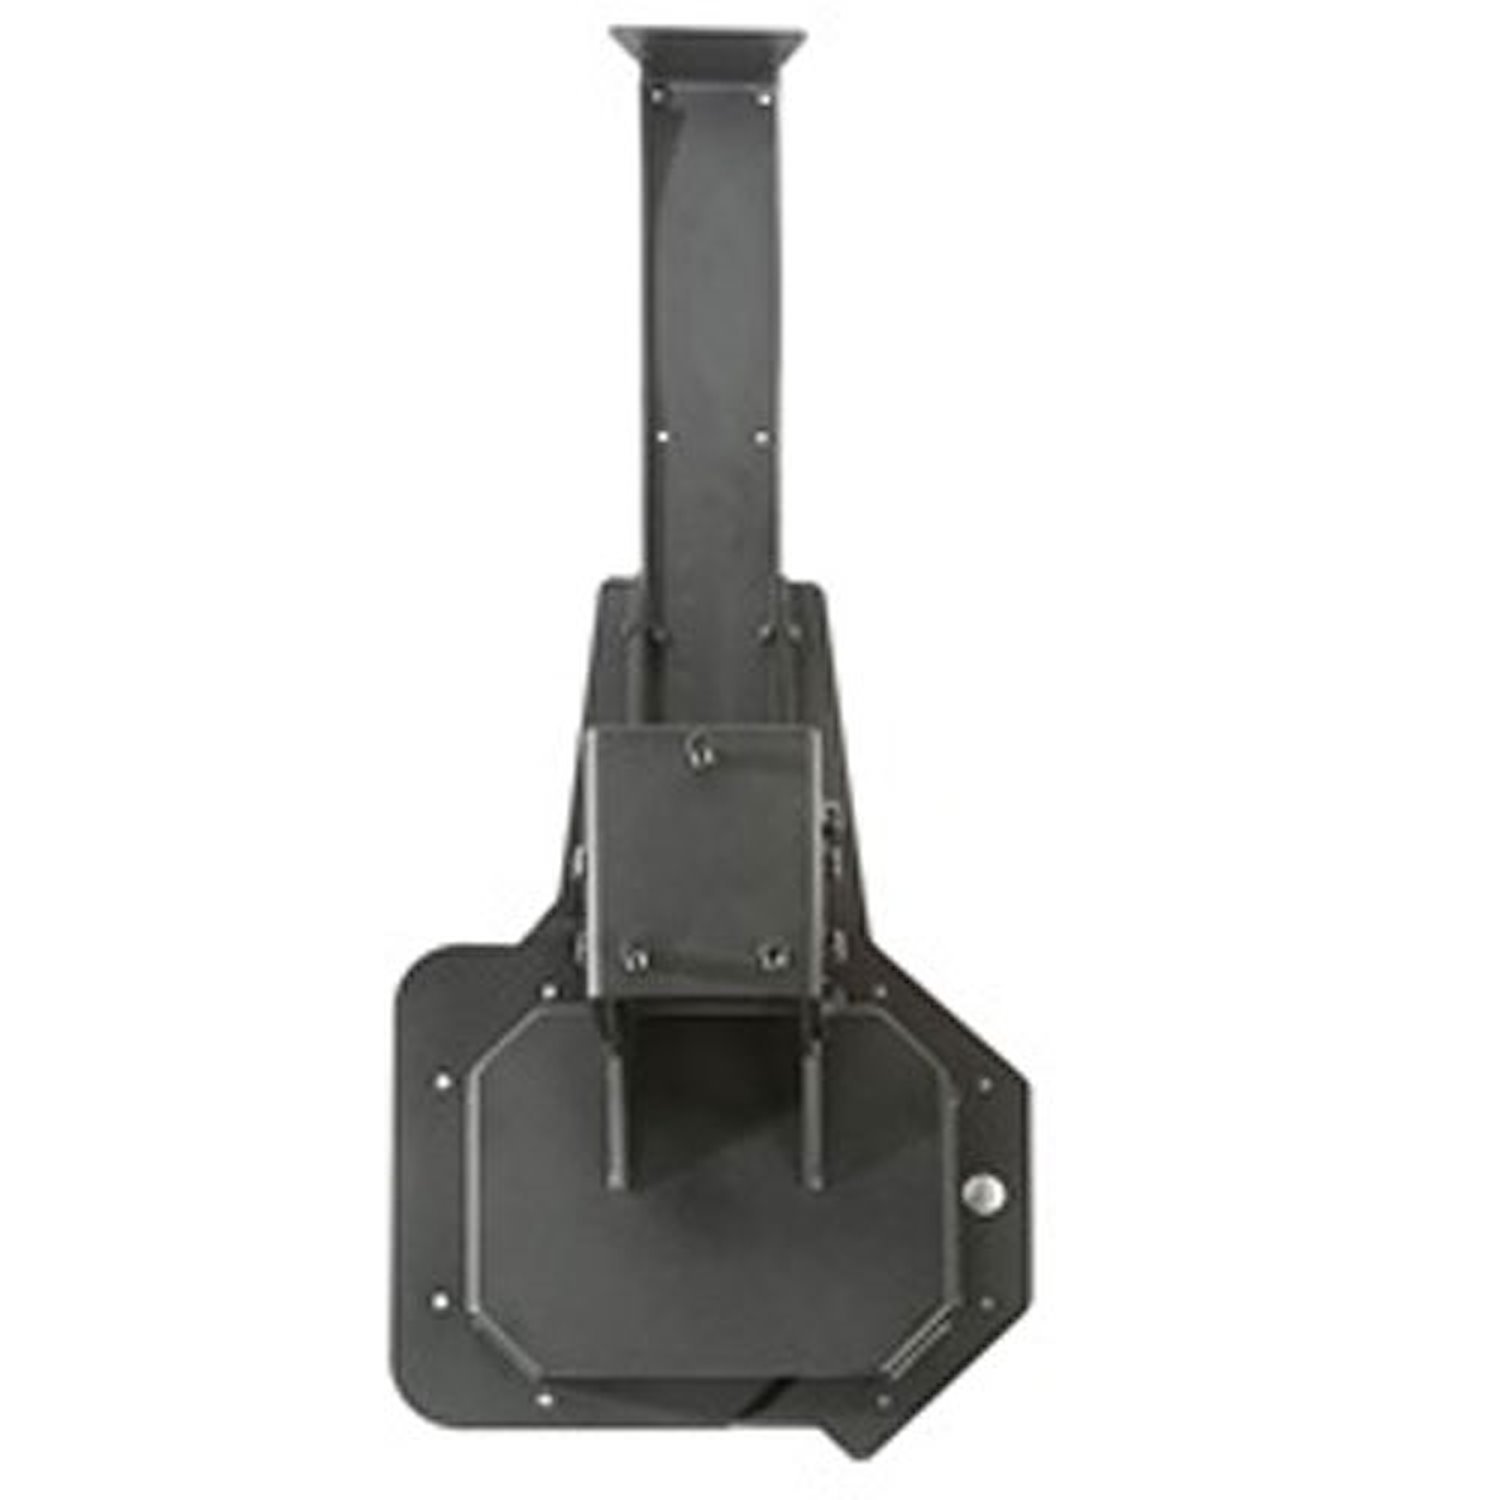 SPARTACUS HD TIRE CARRIER